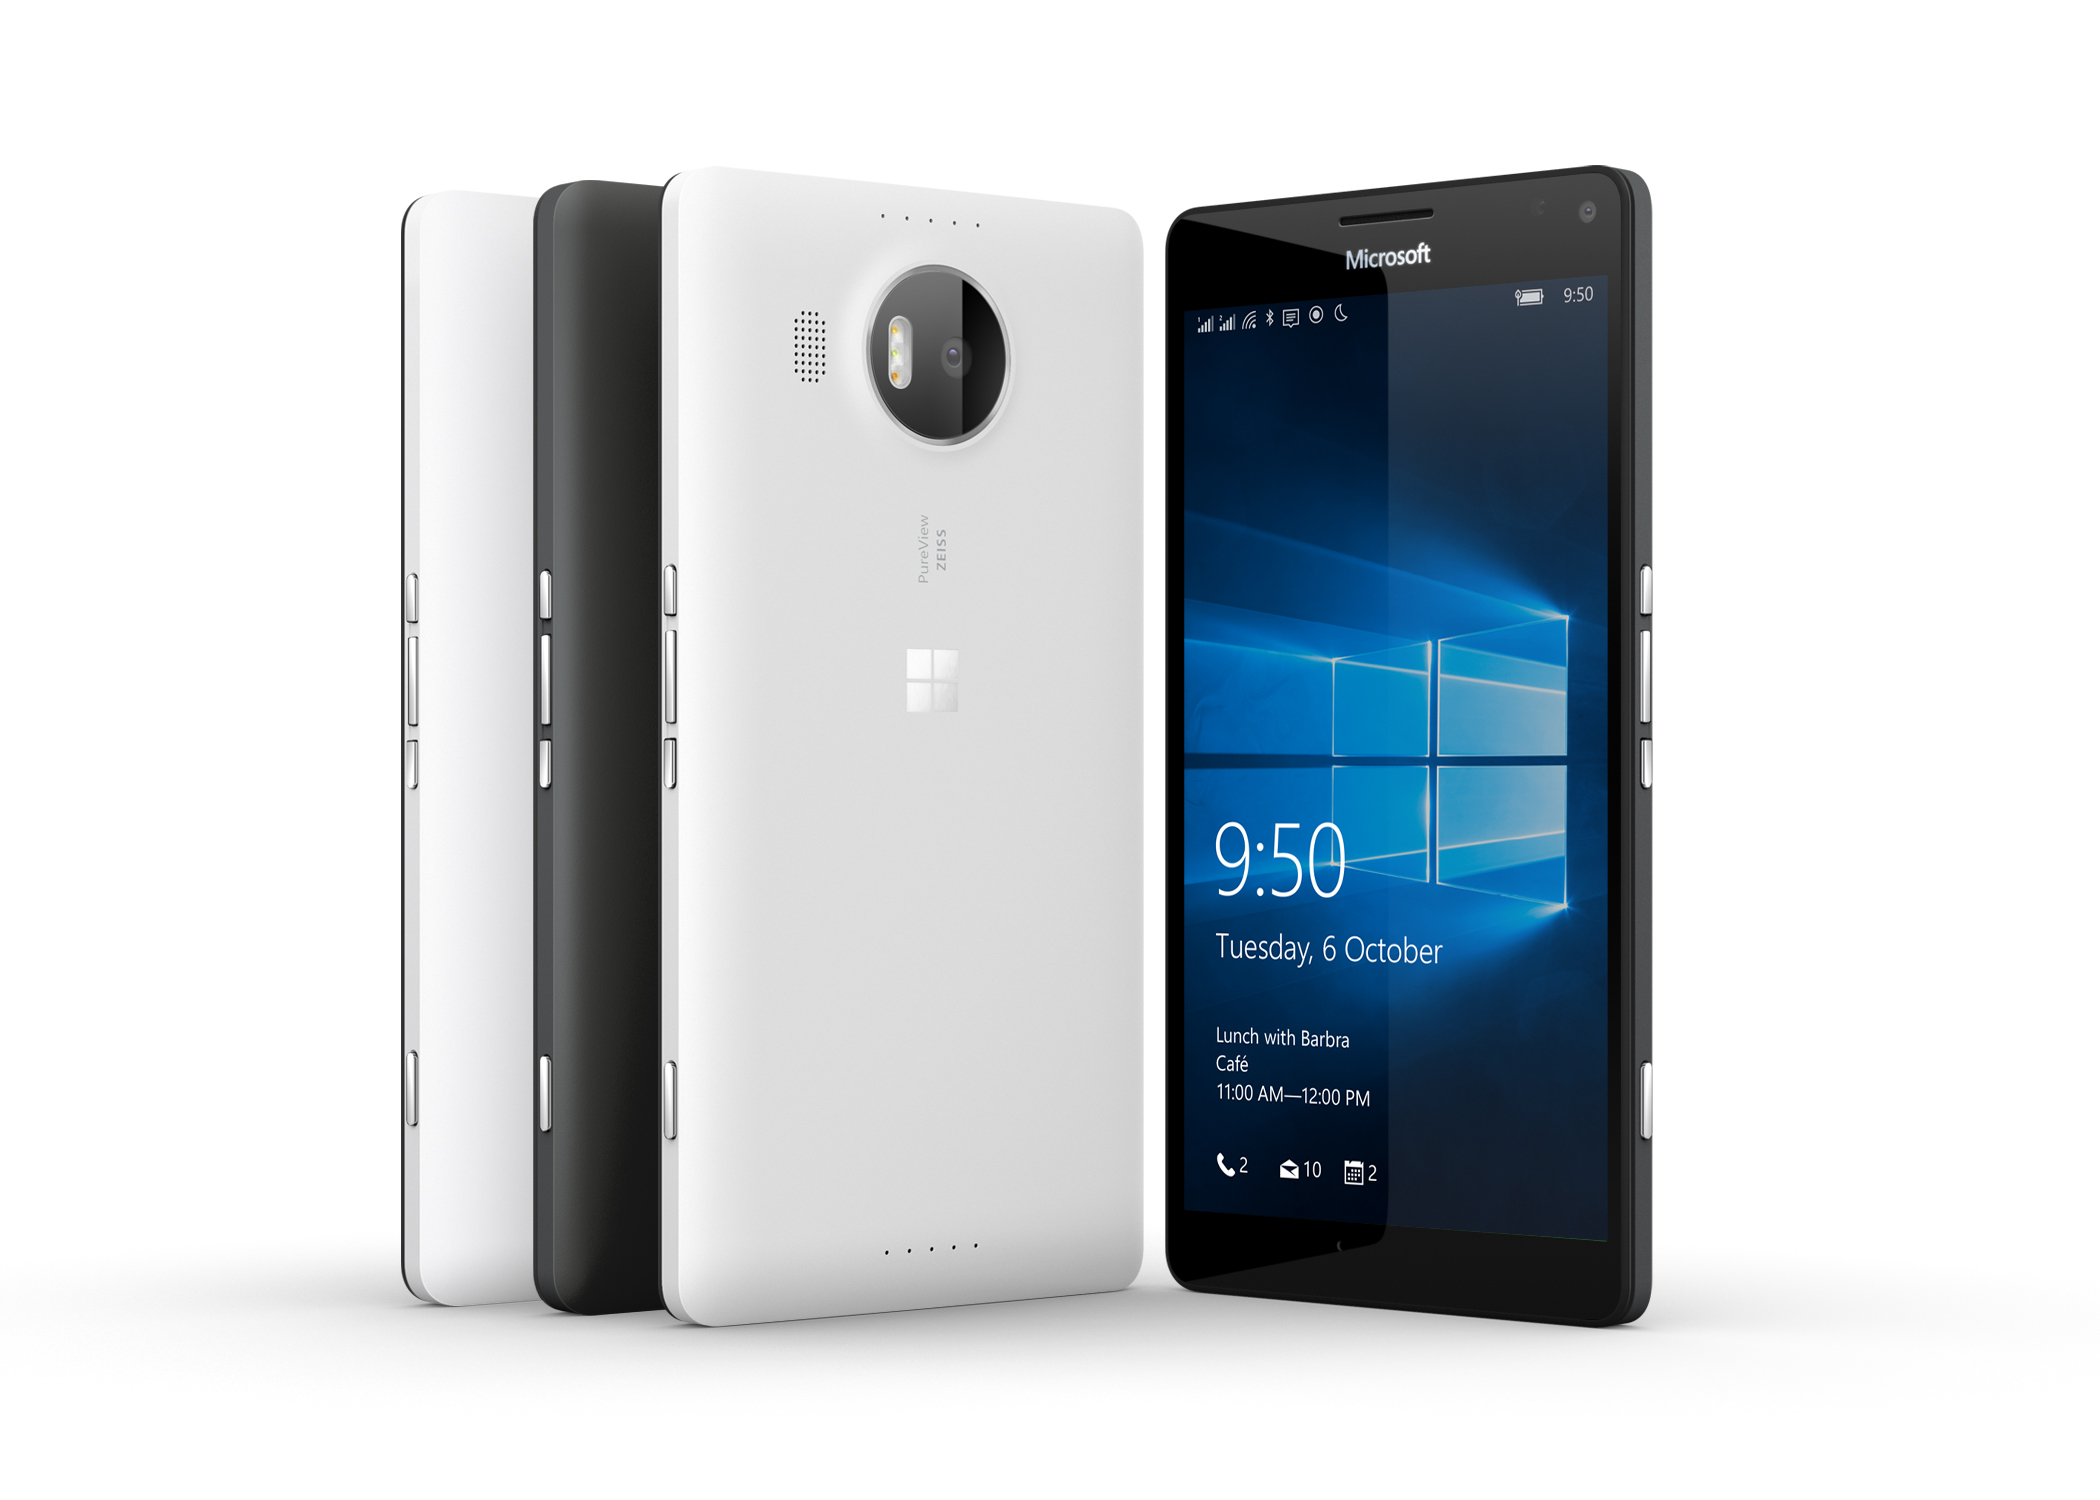 The Microsoft Lumia 950XL with 5.7” QuadHD (1440x2560) AMOLED display, a 20 megapixel camera with Carl Zeiss optics, top of the line Snapdragon 810 chipset, 3GB of RAM and a generous 3340mAh battery. [11JANUARY2016 FEATURES DIGI SECOND]